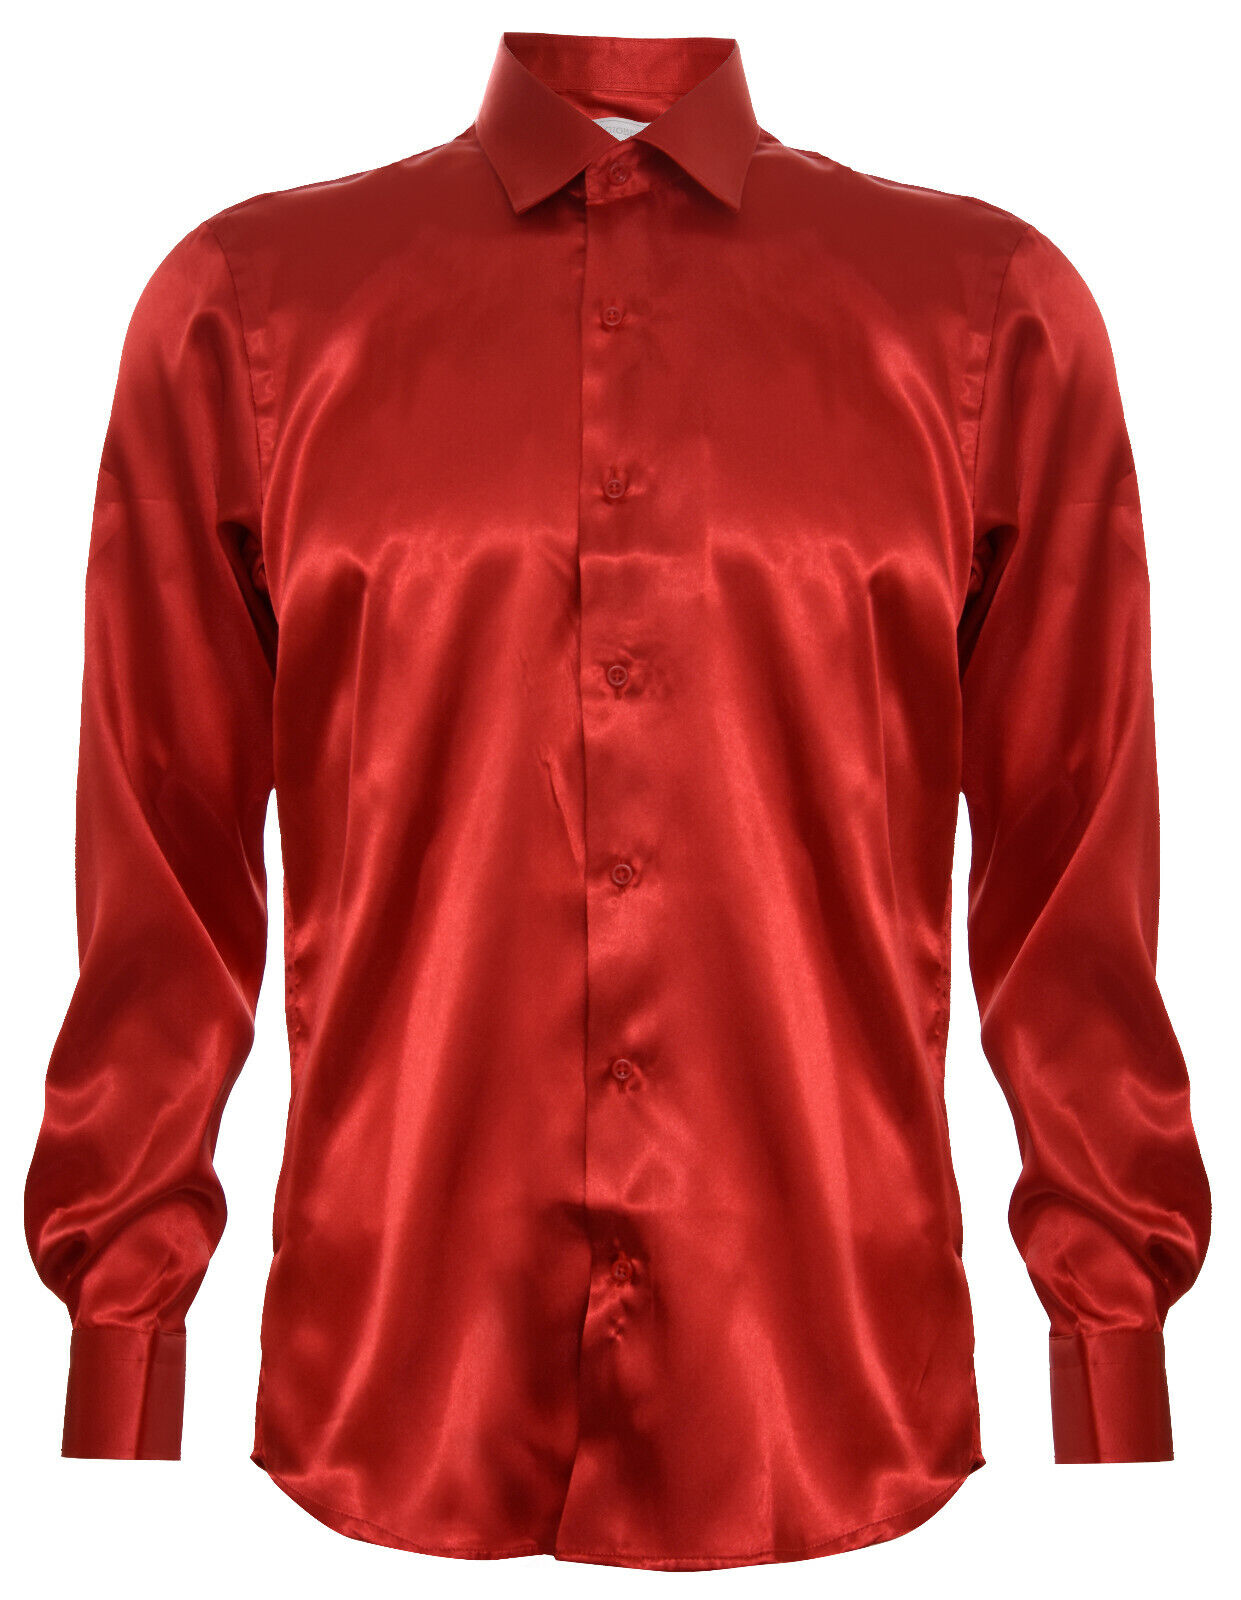 Mens Red Satin Silk Shirt Smart Casual Button Down Cuff Tailored Fit